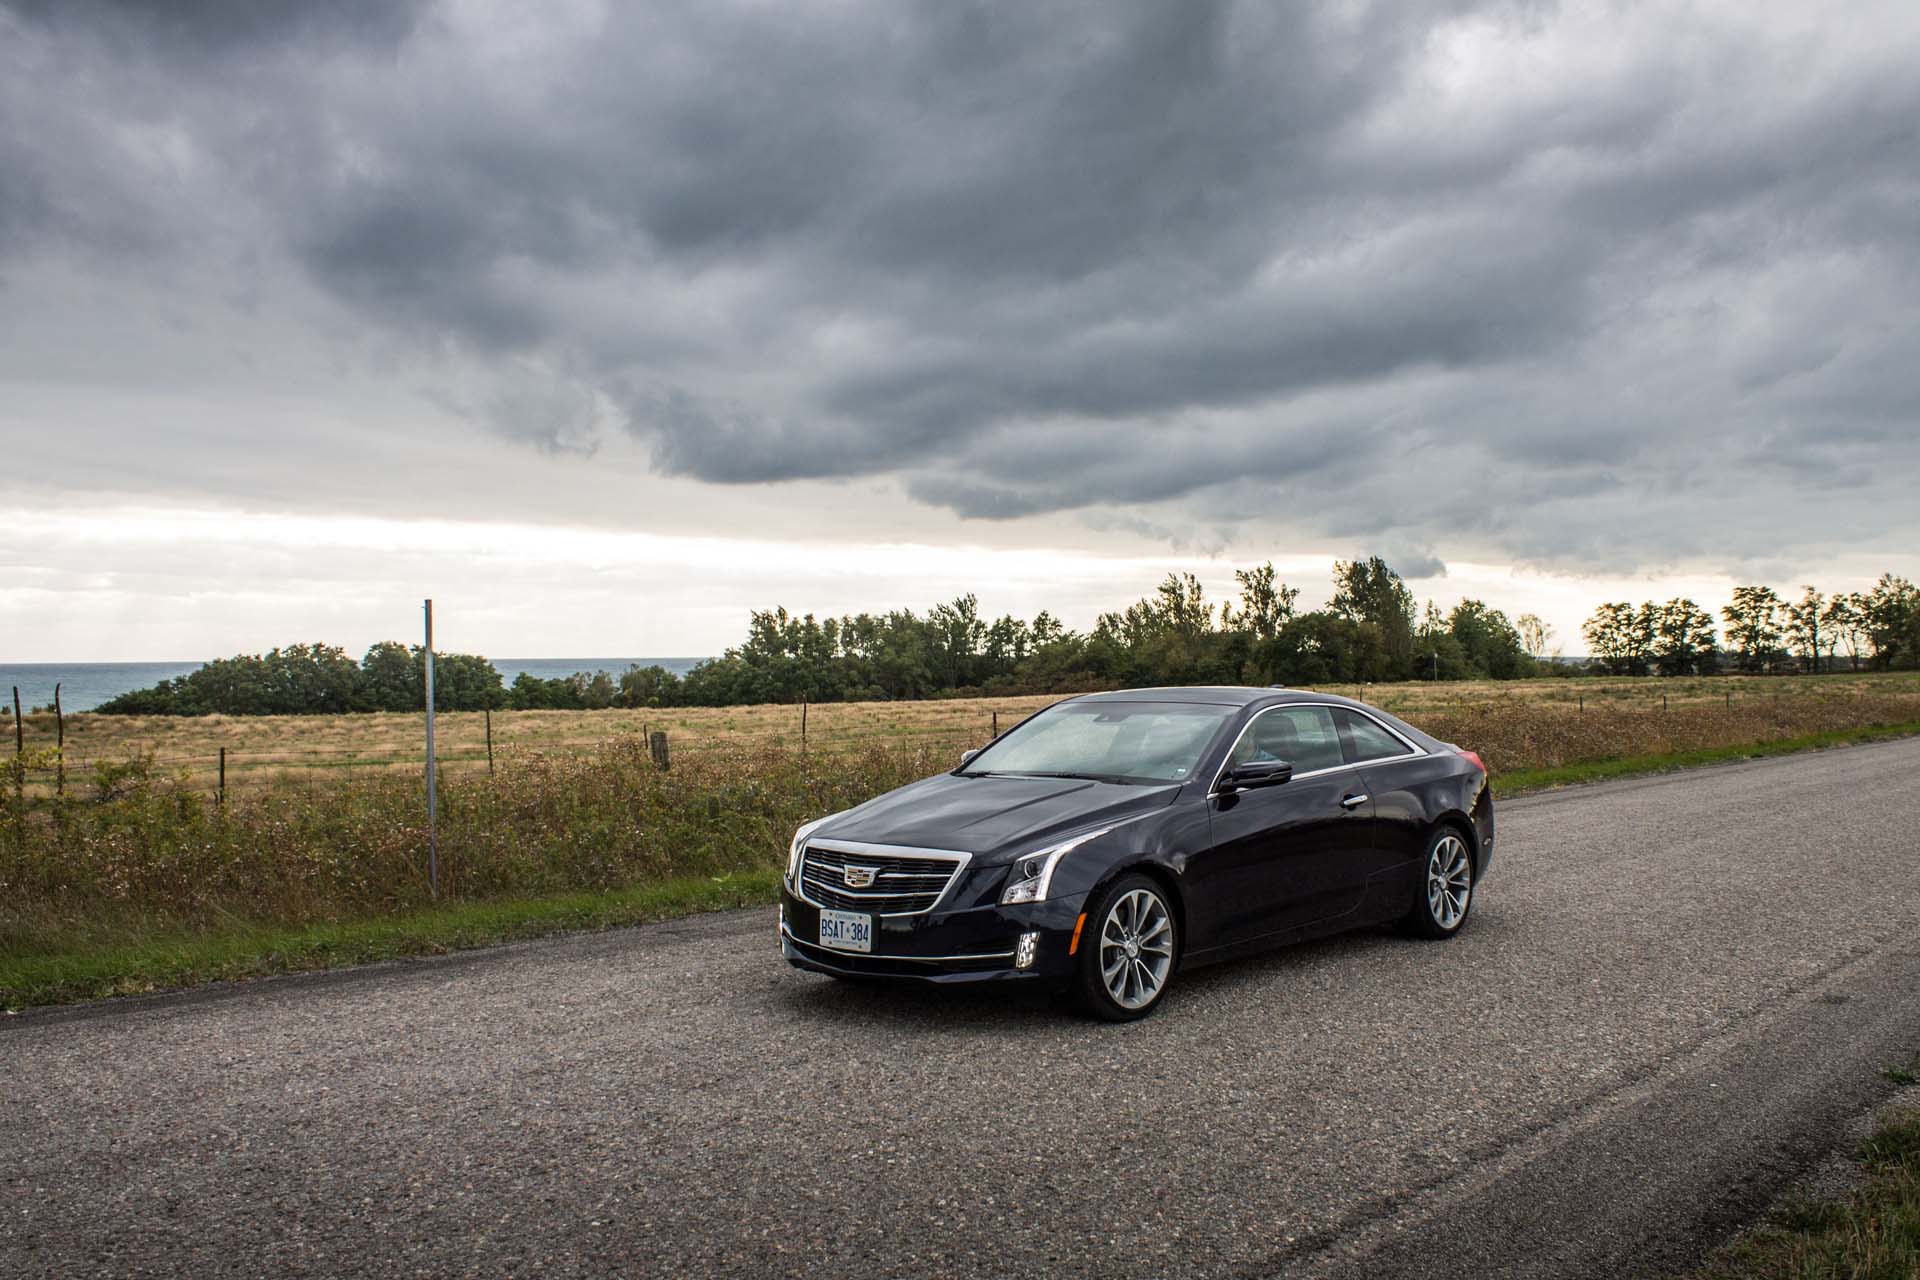 This isn't so much the descendant of the GTO as where the trail goes cold. Take a good look at the underpinnings of GM's Alpha platform, and you just know a V8 would fit. Instead, they've moved things upmarket and put in a twin-turbo V6. That's no bad thing for Cadillac's brand, but it is a bit sad that the best-Pontiac-ever never really happened. Imagine a 400+ hp, rear-drive compact American sport sedan, a budget-priced counterthrust to the M3 and C63 with cloth Recaros and either an eight-speed paddle-shifted automatic or genuine manual. It'd have been a Corvette for the family-man.